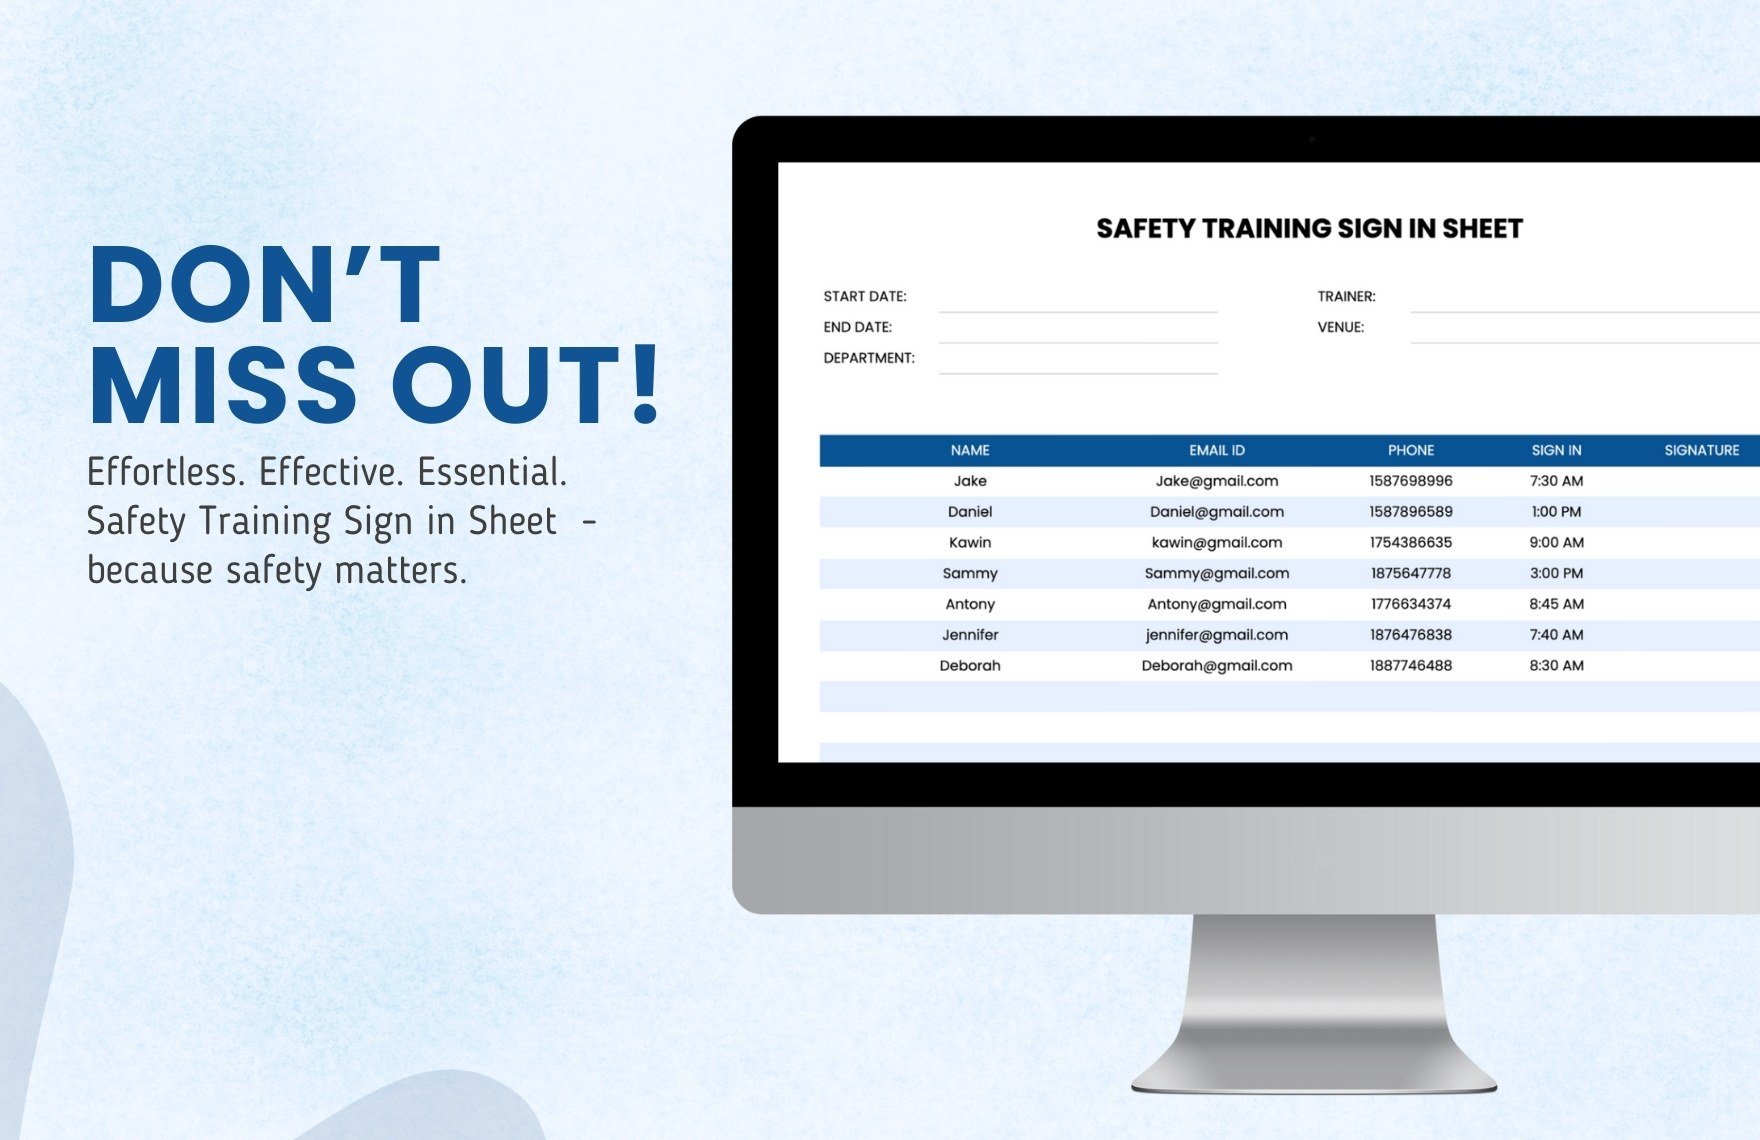 Safety Training Sign in Sheet Template